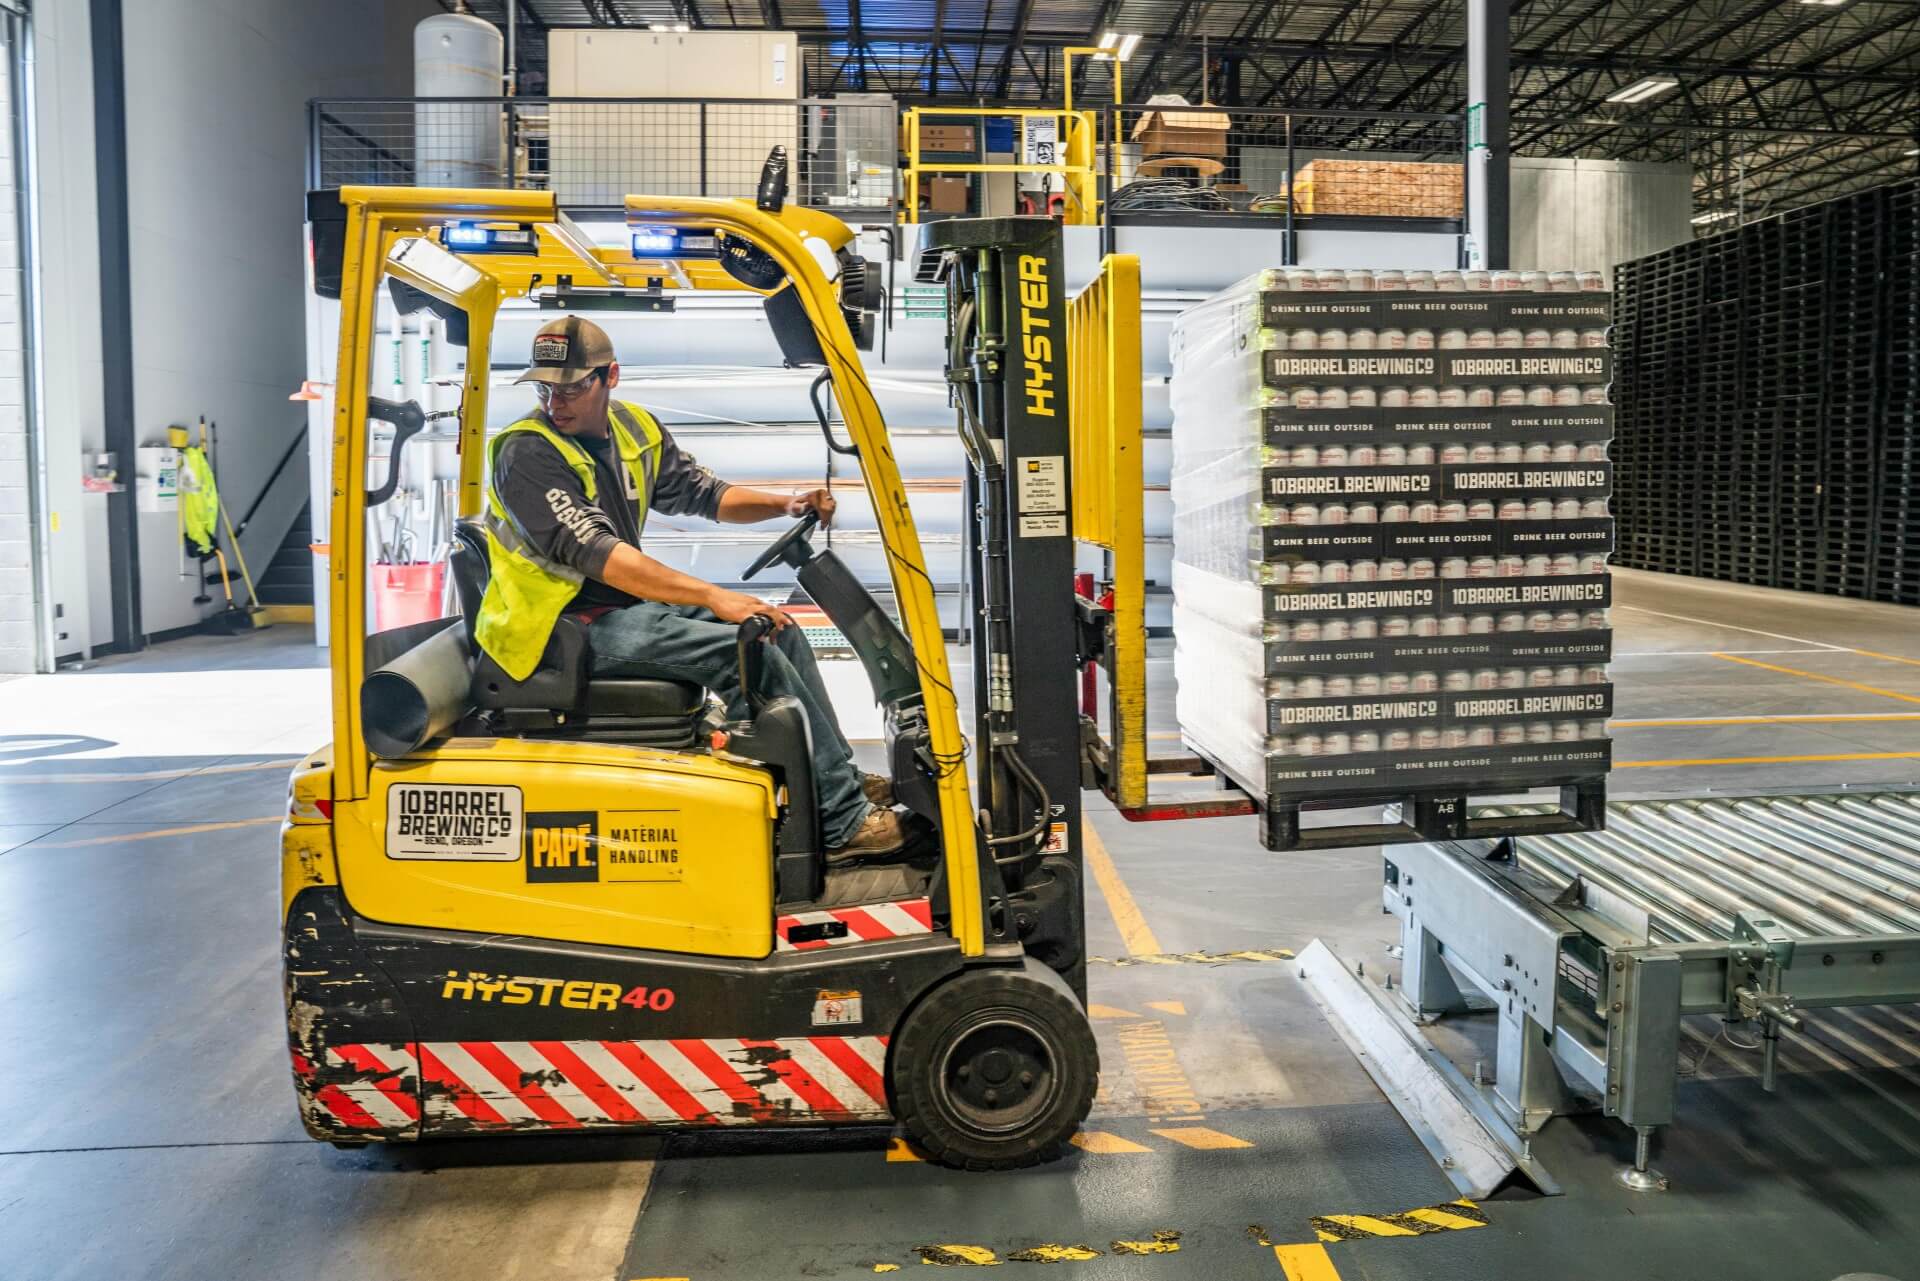 image of a man driving a forklift truck in a warehouse